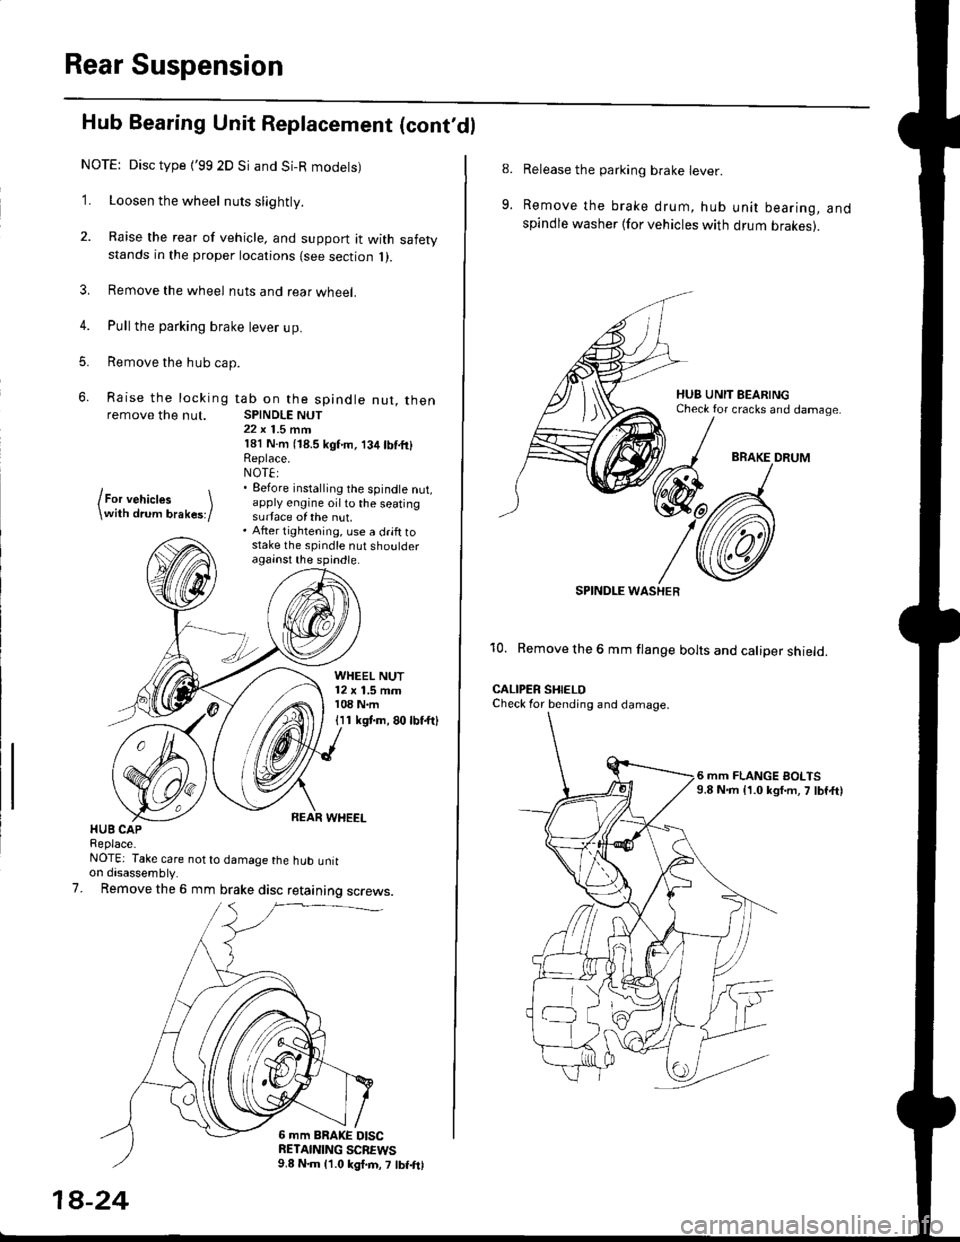 HONDA CIVIC 1997 6.G Workshop Manual Rear Suspension
Hub Bearing Unit Replacement (contdl
NOTE: Disc type {99 2D Si and Si-R modets)
1. Loosen the wheel nuts slightly.
2. Raise the rear of vehicle, and support it with safetystands in t